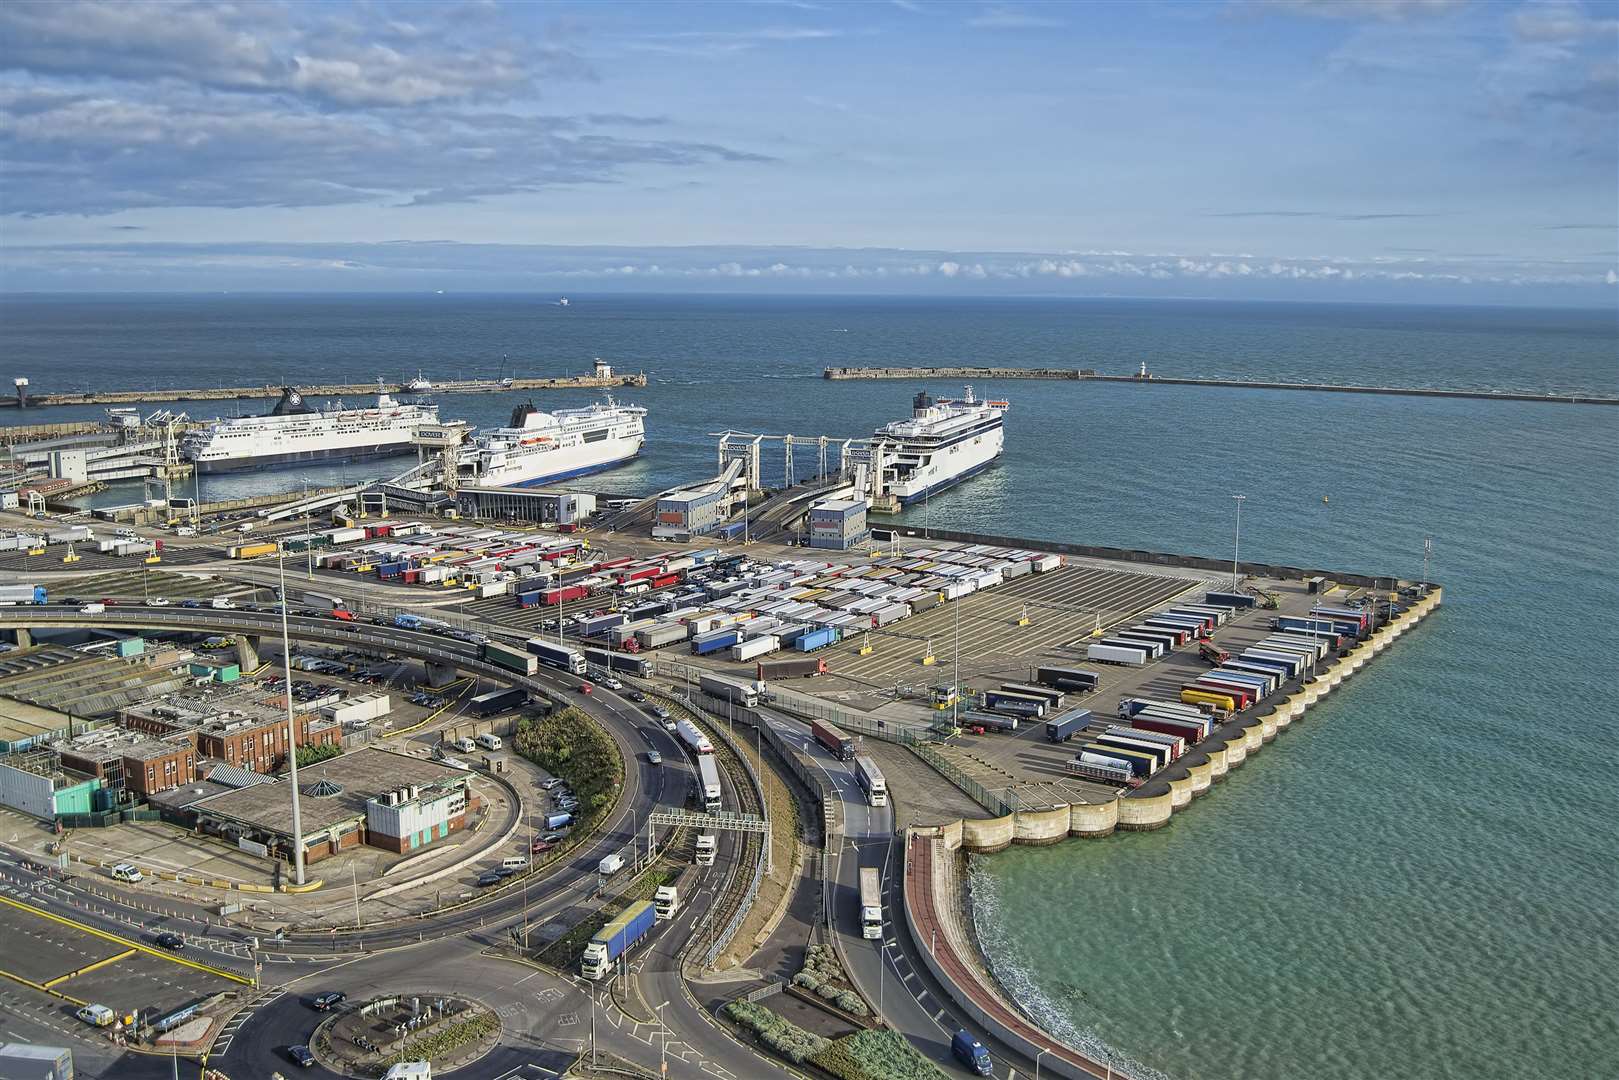 P&O is looking to regain its market position for freight transport across the Channel